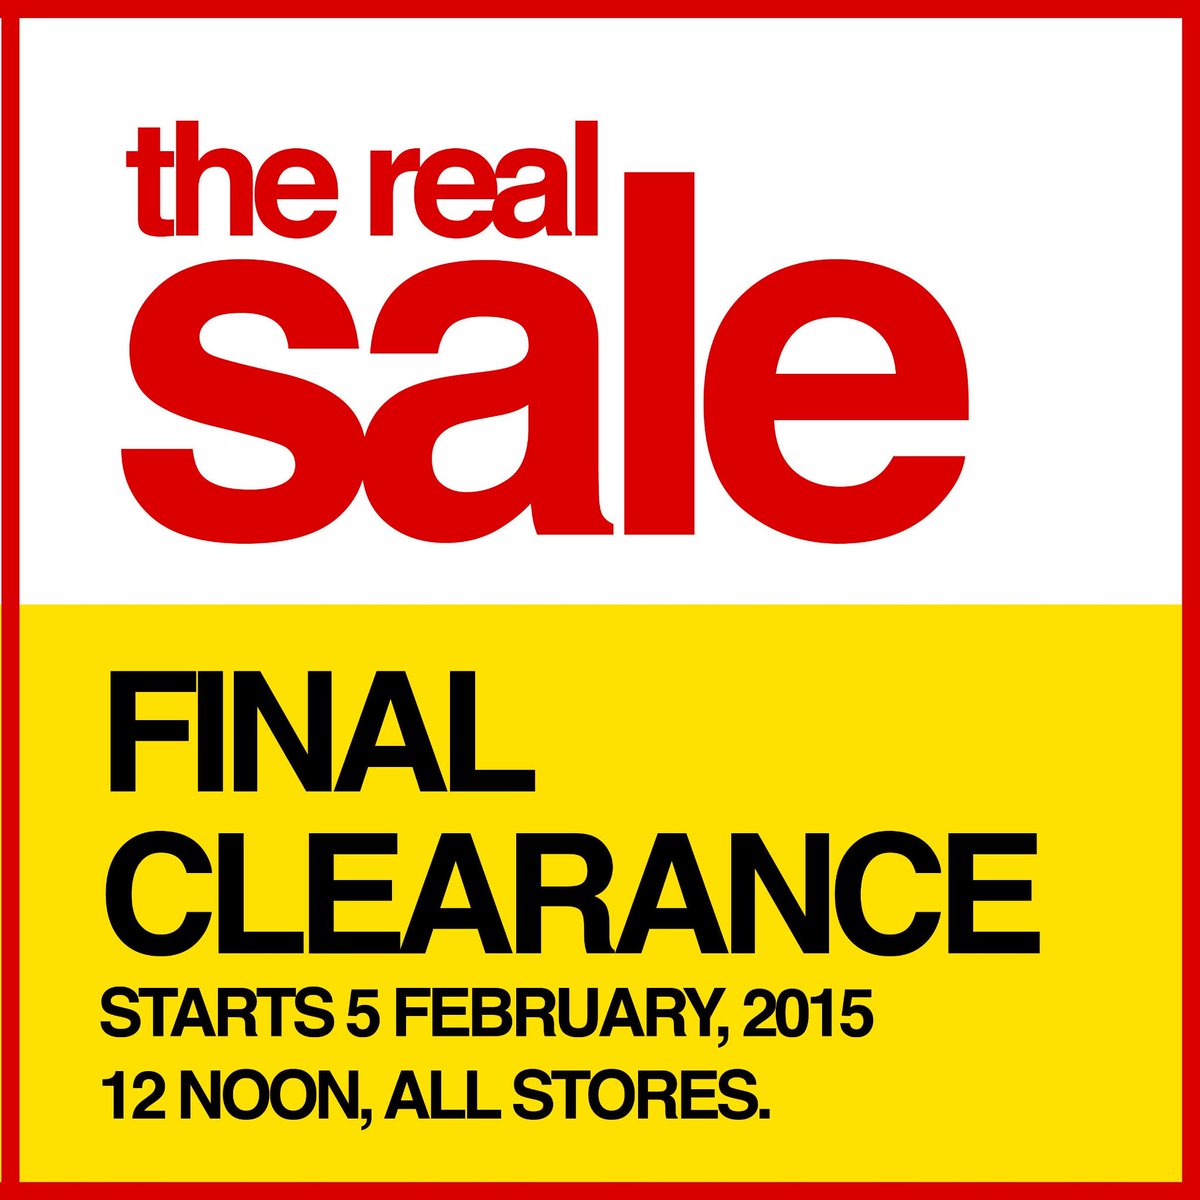 SALE final clearance starts at 12 noon ...